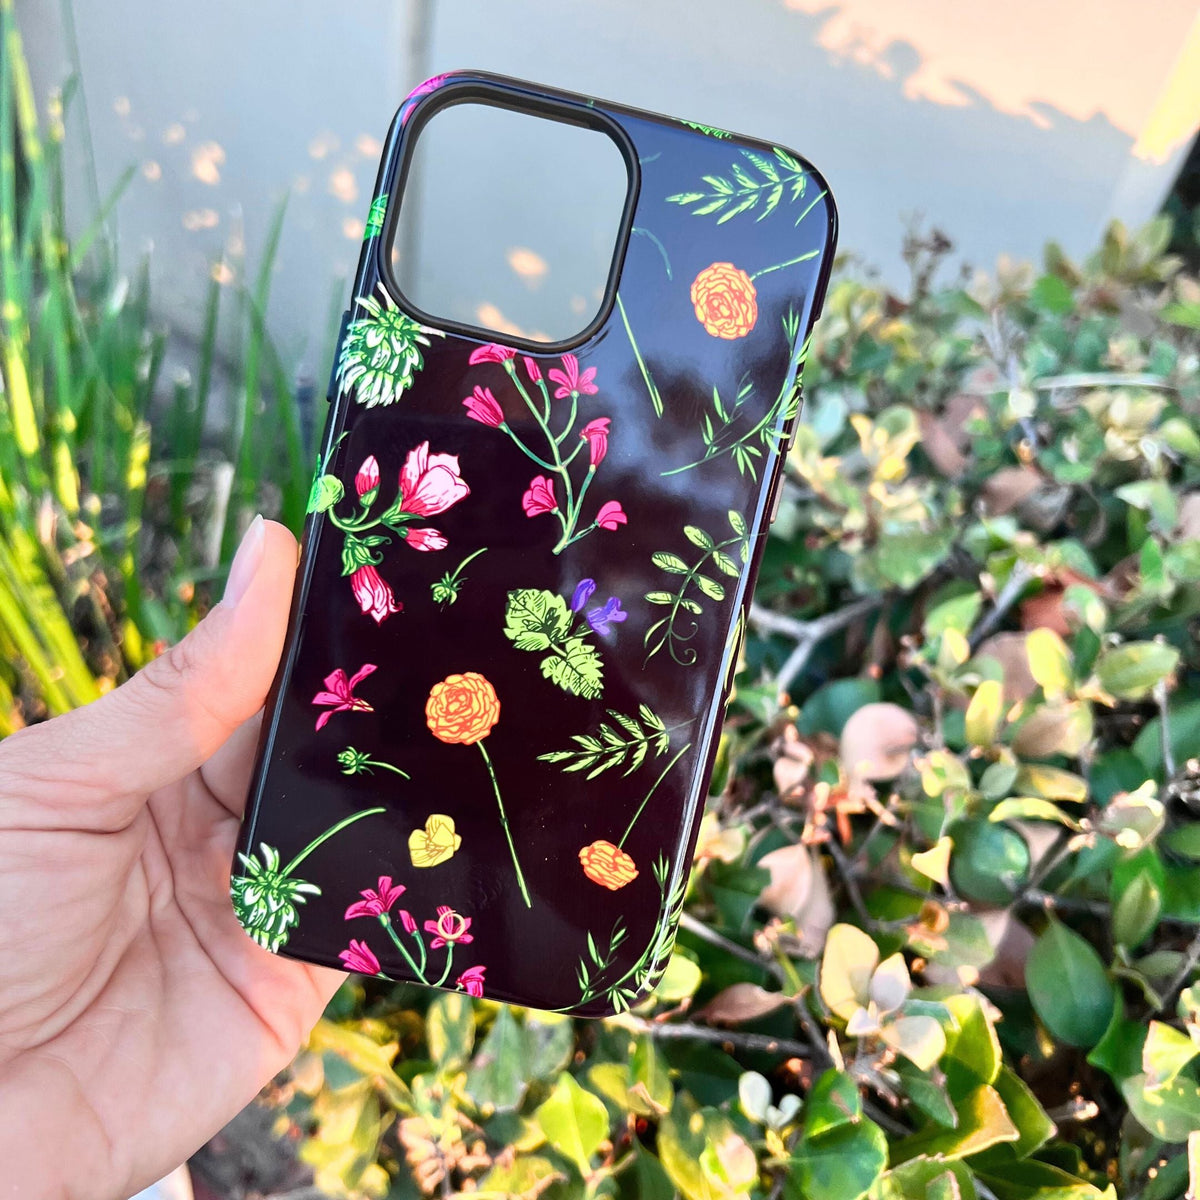 Blossom Field Flowers iPhone Case - iPhone 11